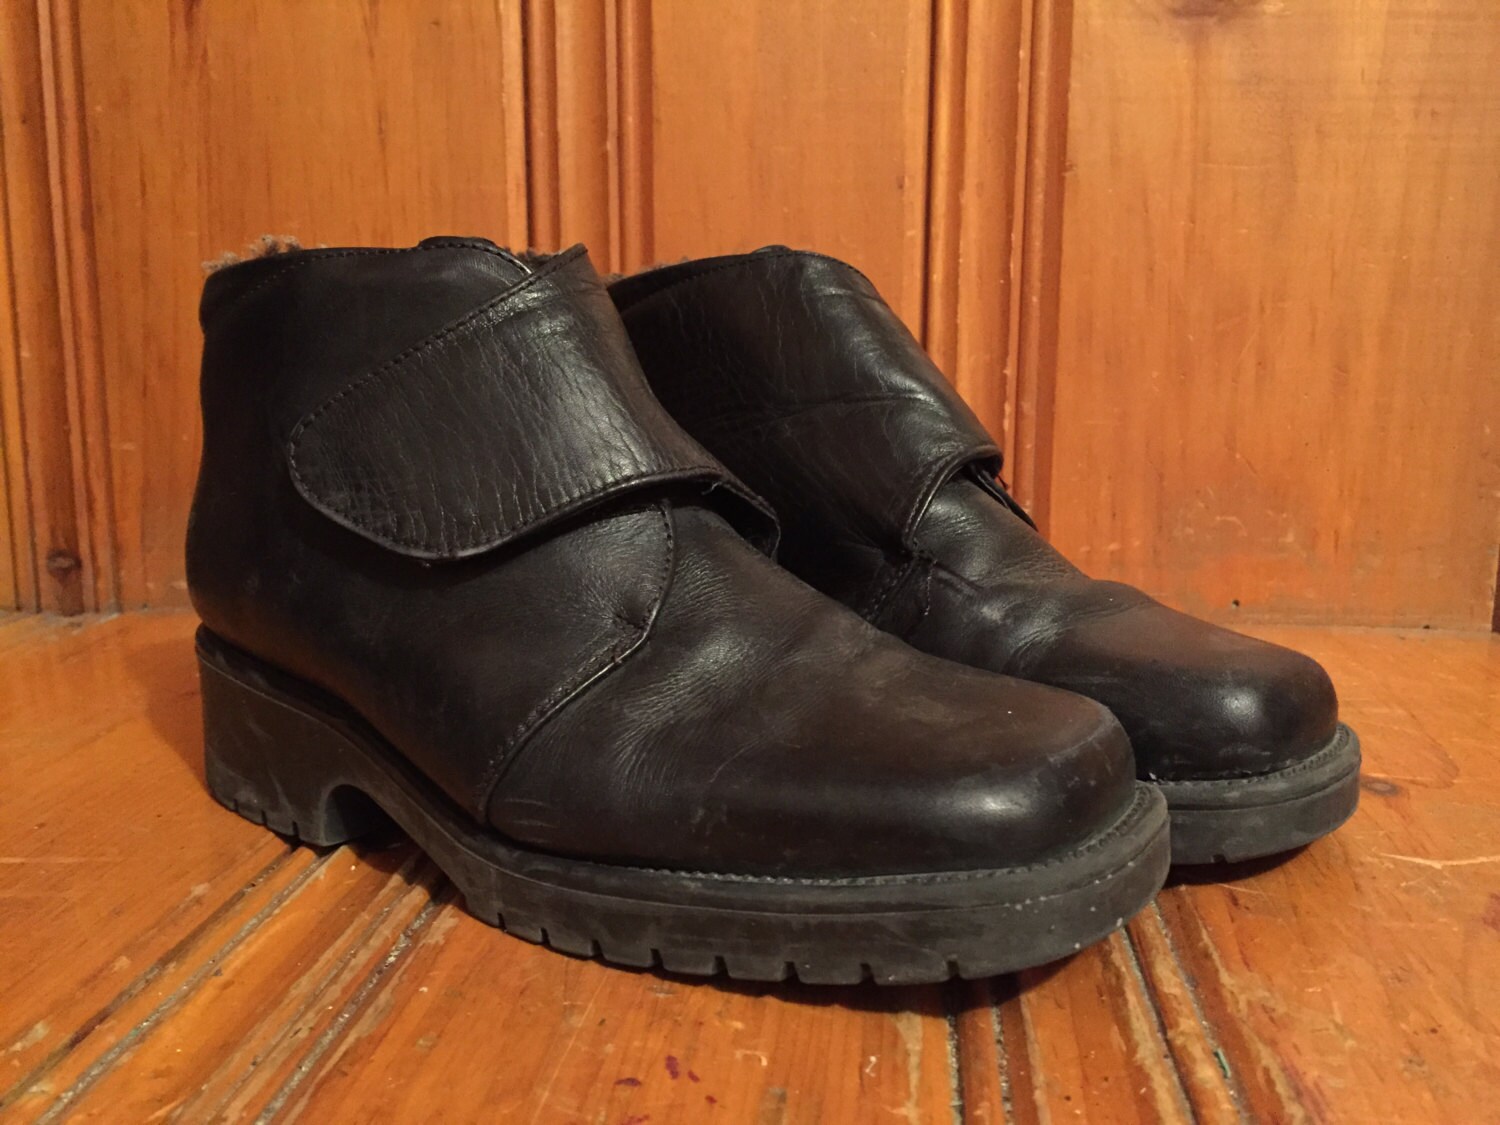 Vintage LL Bean Black Boots Wool Lined Ankle Boots Vintage